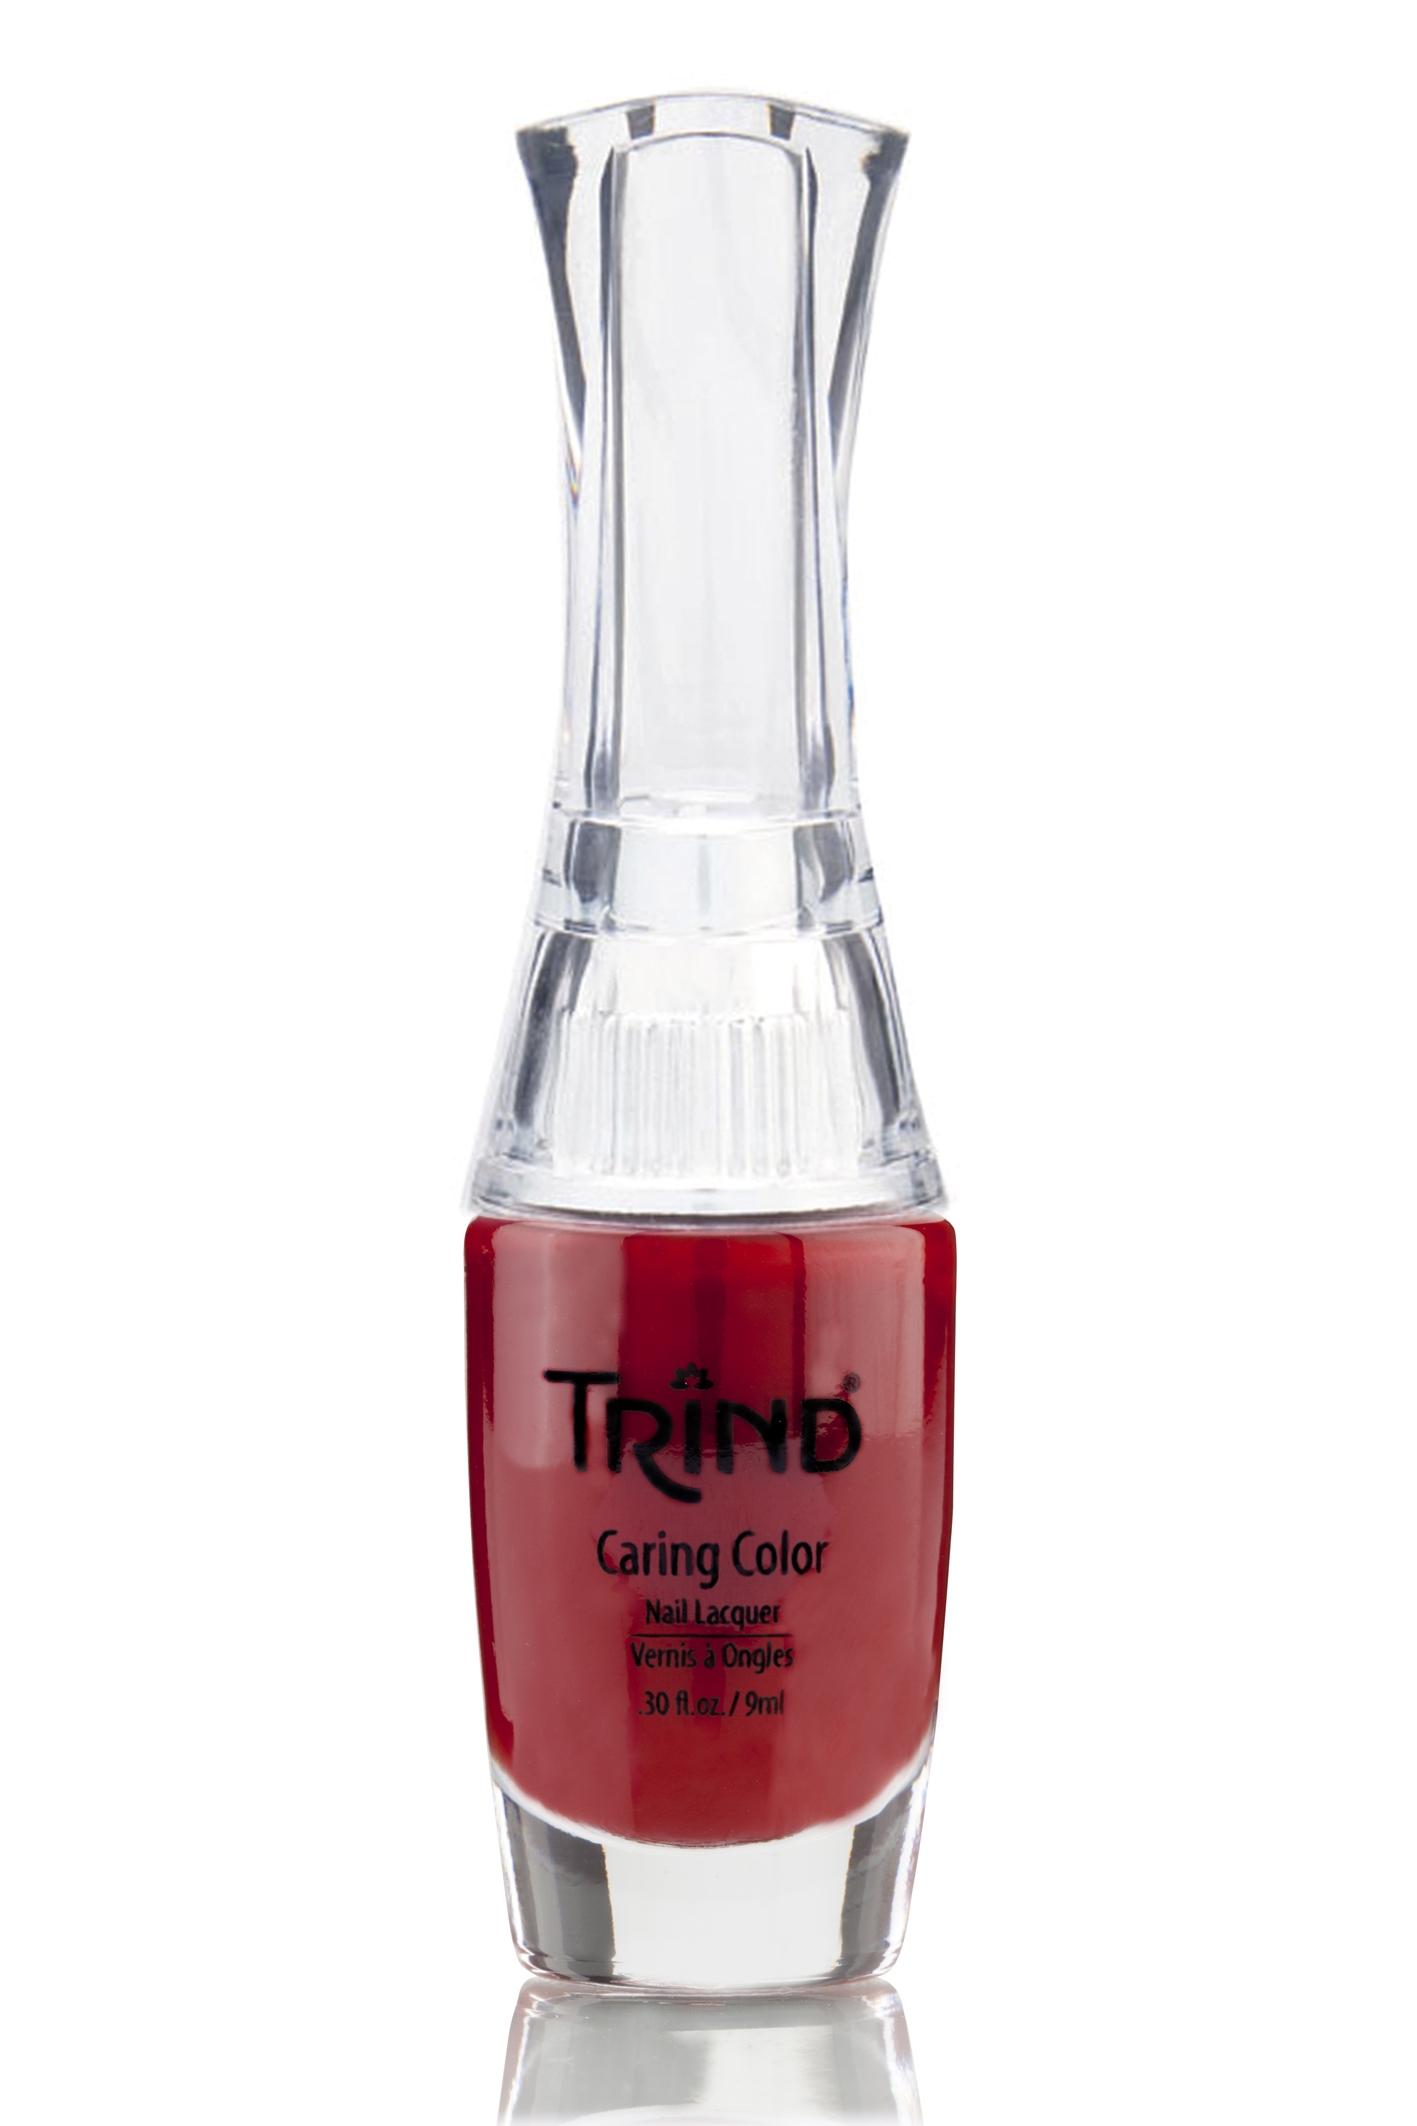 Trind Caring Color Nail Lacquer CC176